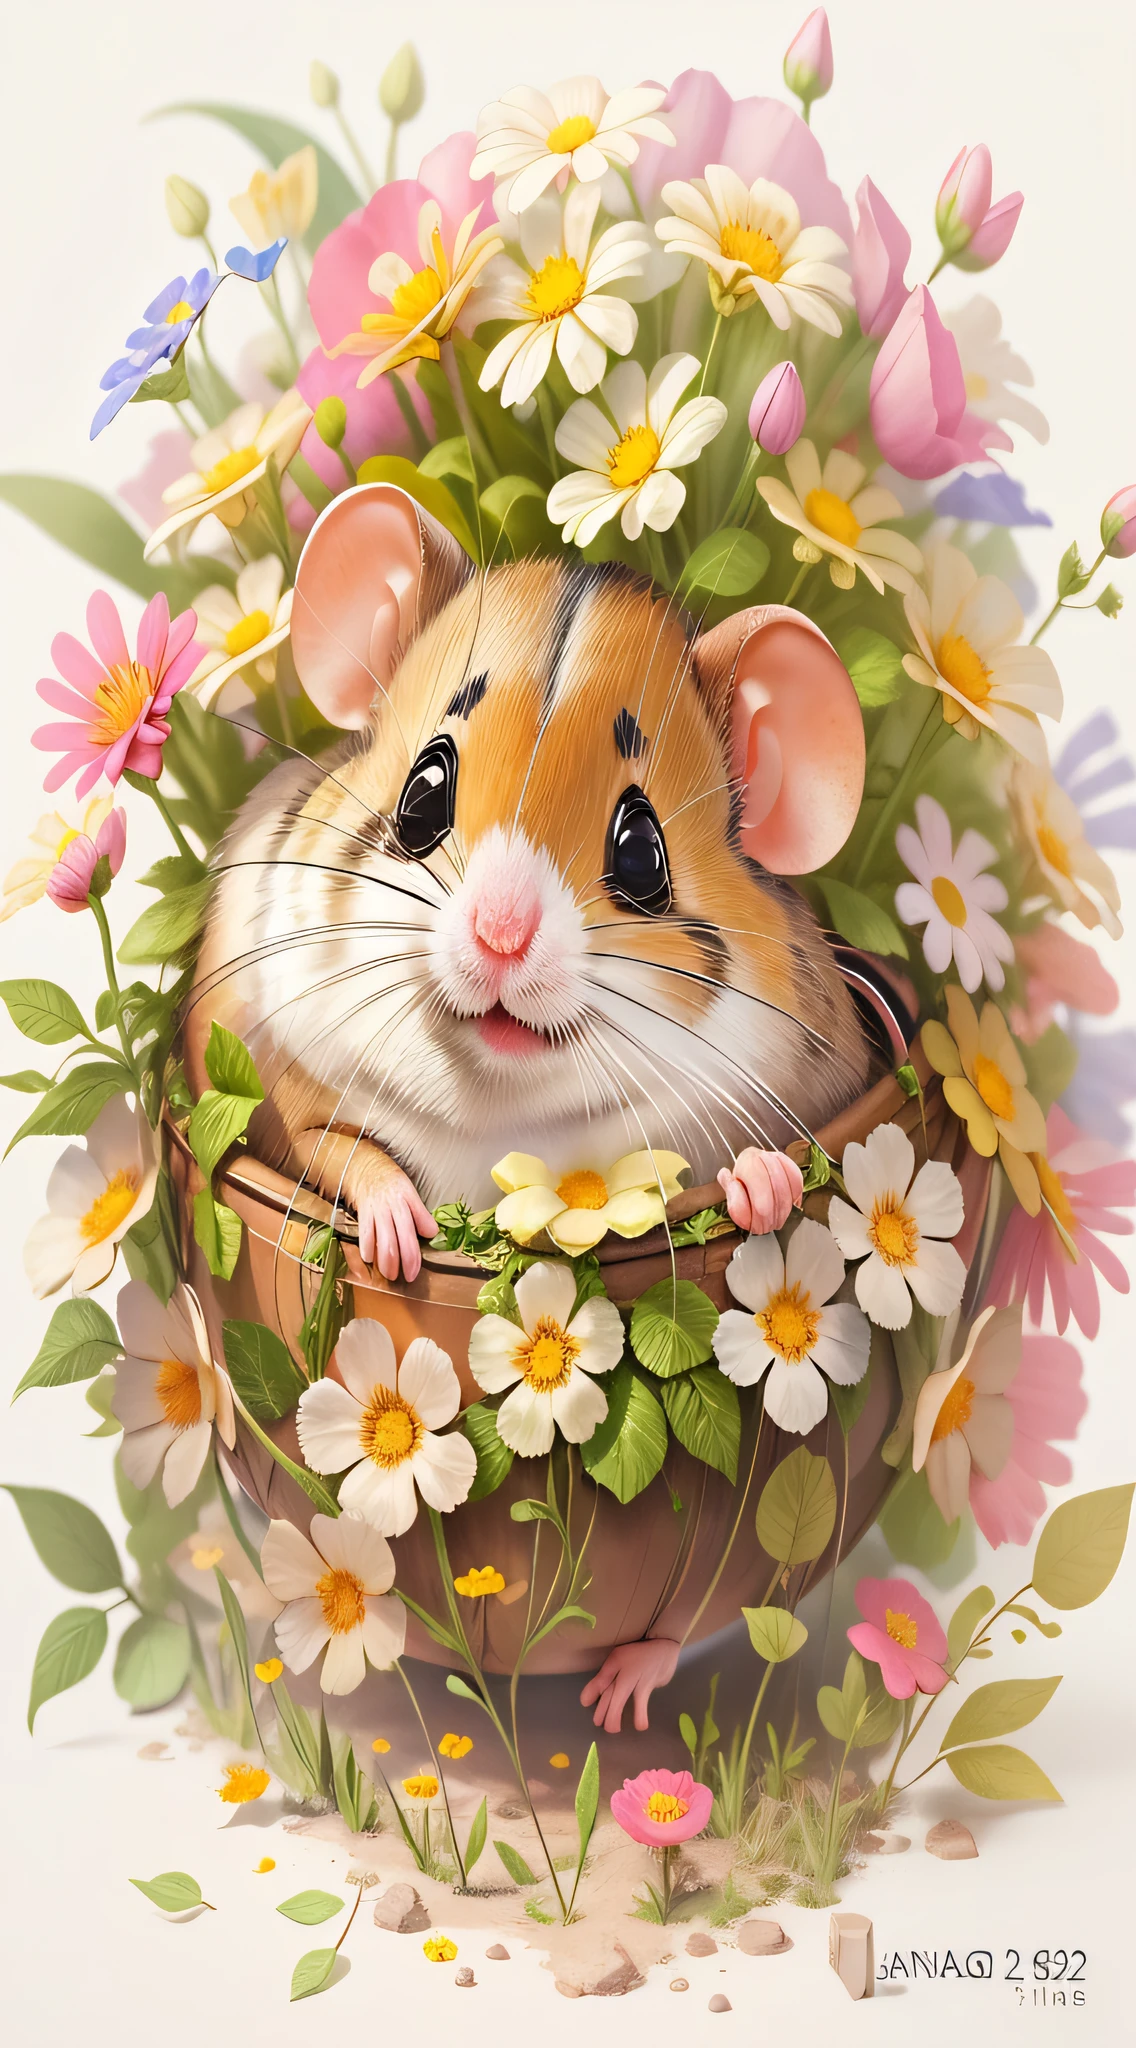 There was a little mouse sitting in a basket of flowers, lovely digital painting, Cute detailed digital art, adorable digital art, cute detailed artwork, by Yang J, highly detailed digital painting, cute mouse pokemon, digital painting highly detailed, hamster, cute animal, cute artwork, full-colour illustration, Beautiful and cute, author：Ryan Yee, author：Shitao, cute illustration